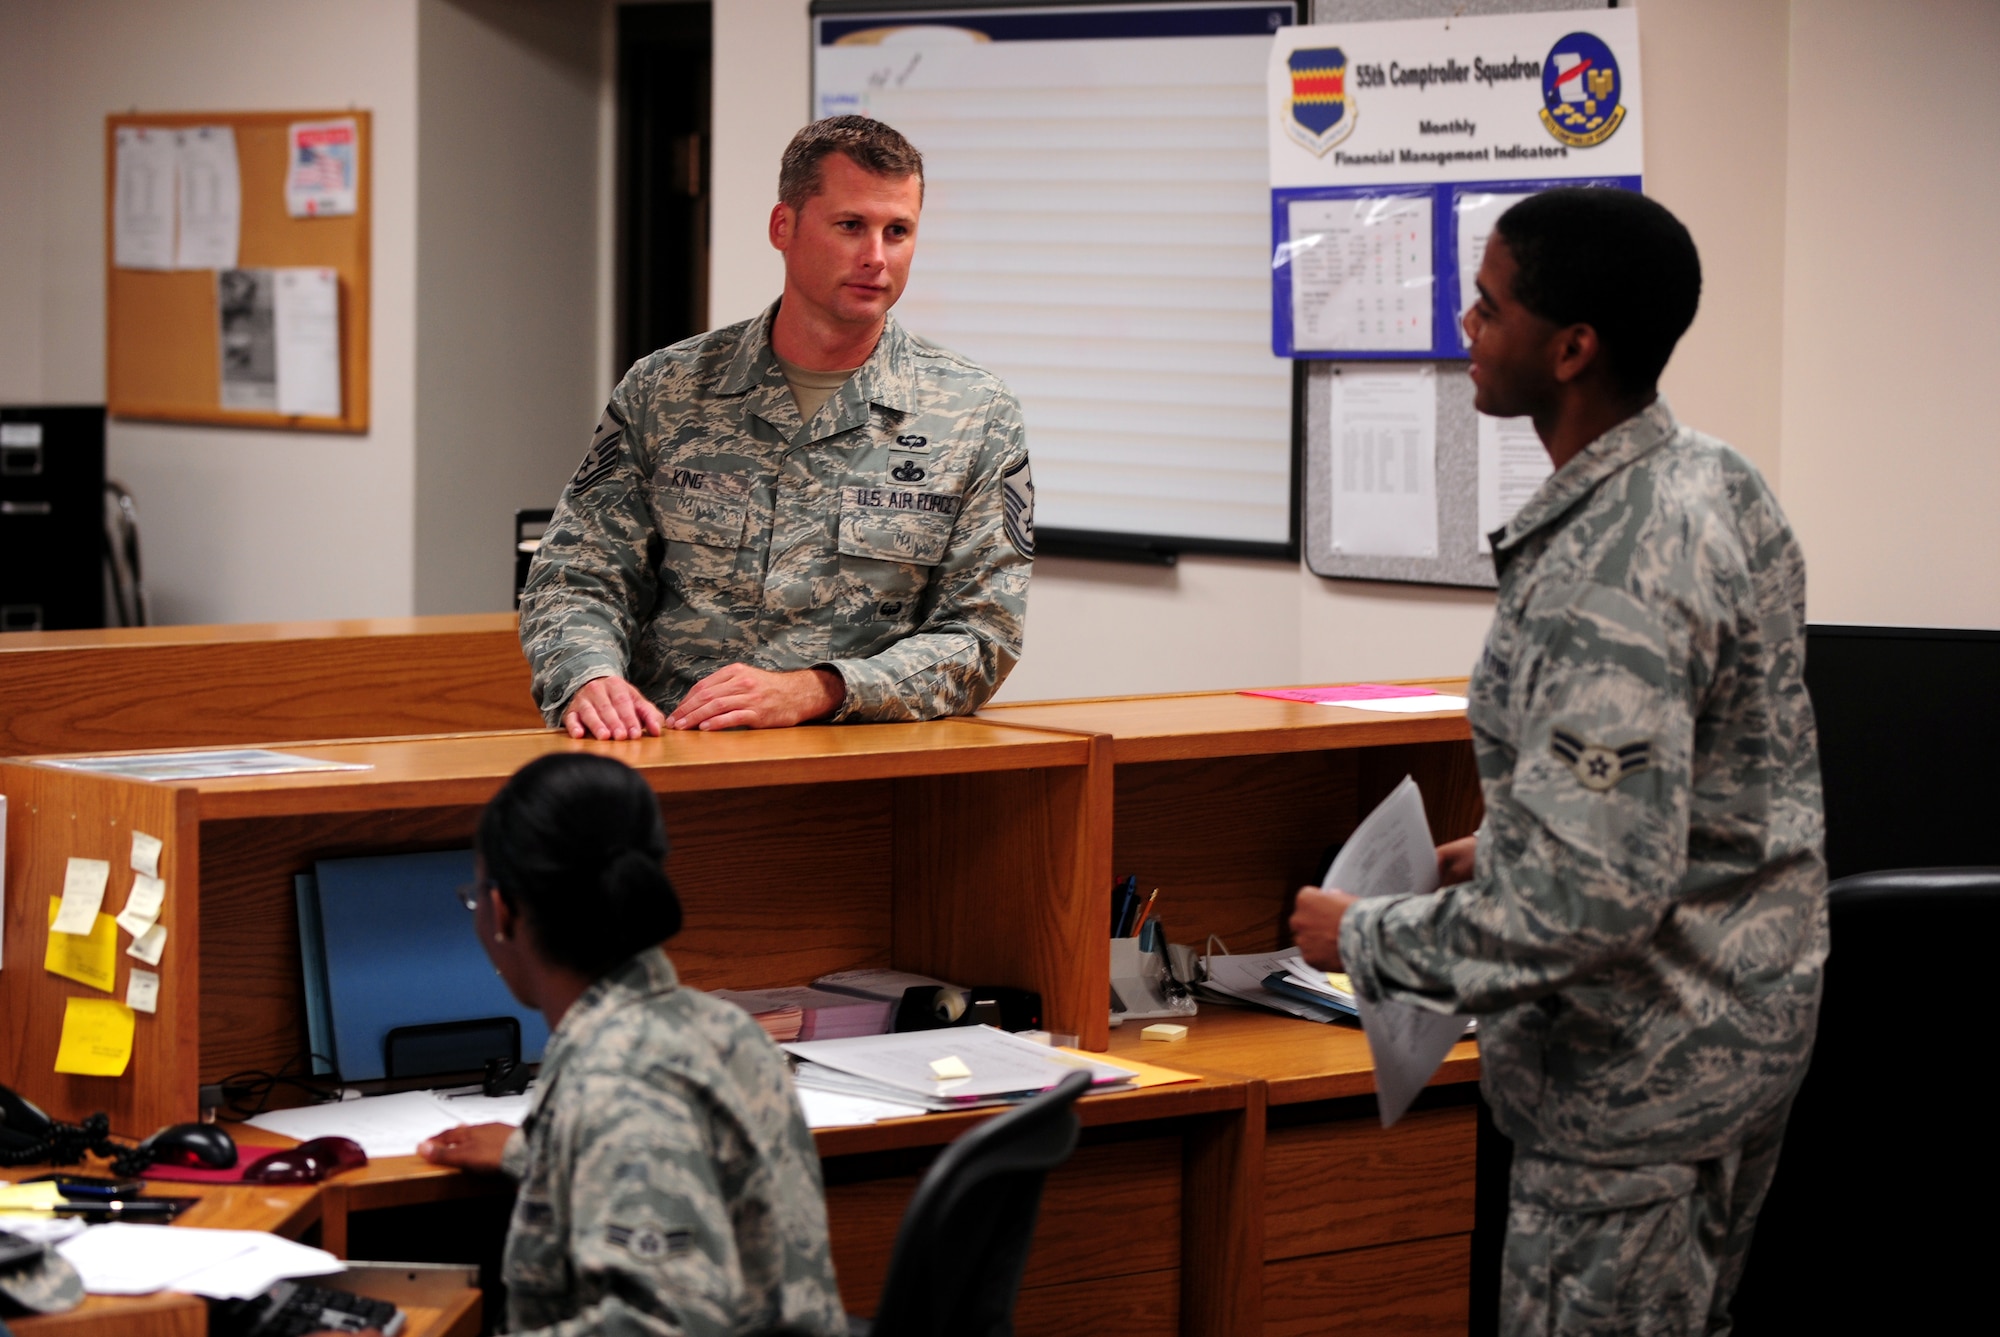 OFFUTT AIR FORCE BASE, Neb. - Master Sgt. Justin King, first sergeant for the 55th Wing staff, meets with Airman 1st Class Darrius Denkins, a financial analyst with the 55th Comptroller Squadron, as part of his daily rounds, Aug. 25.  Sergeant King handles many administrative duties and administers corrective actions when necessary to members under the commander's authority.
U.S. Air Force photo by Josh Plueger
